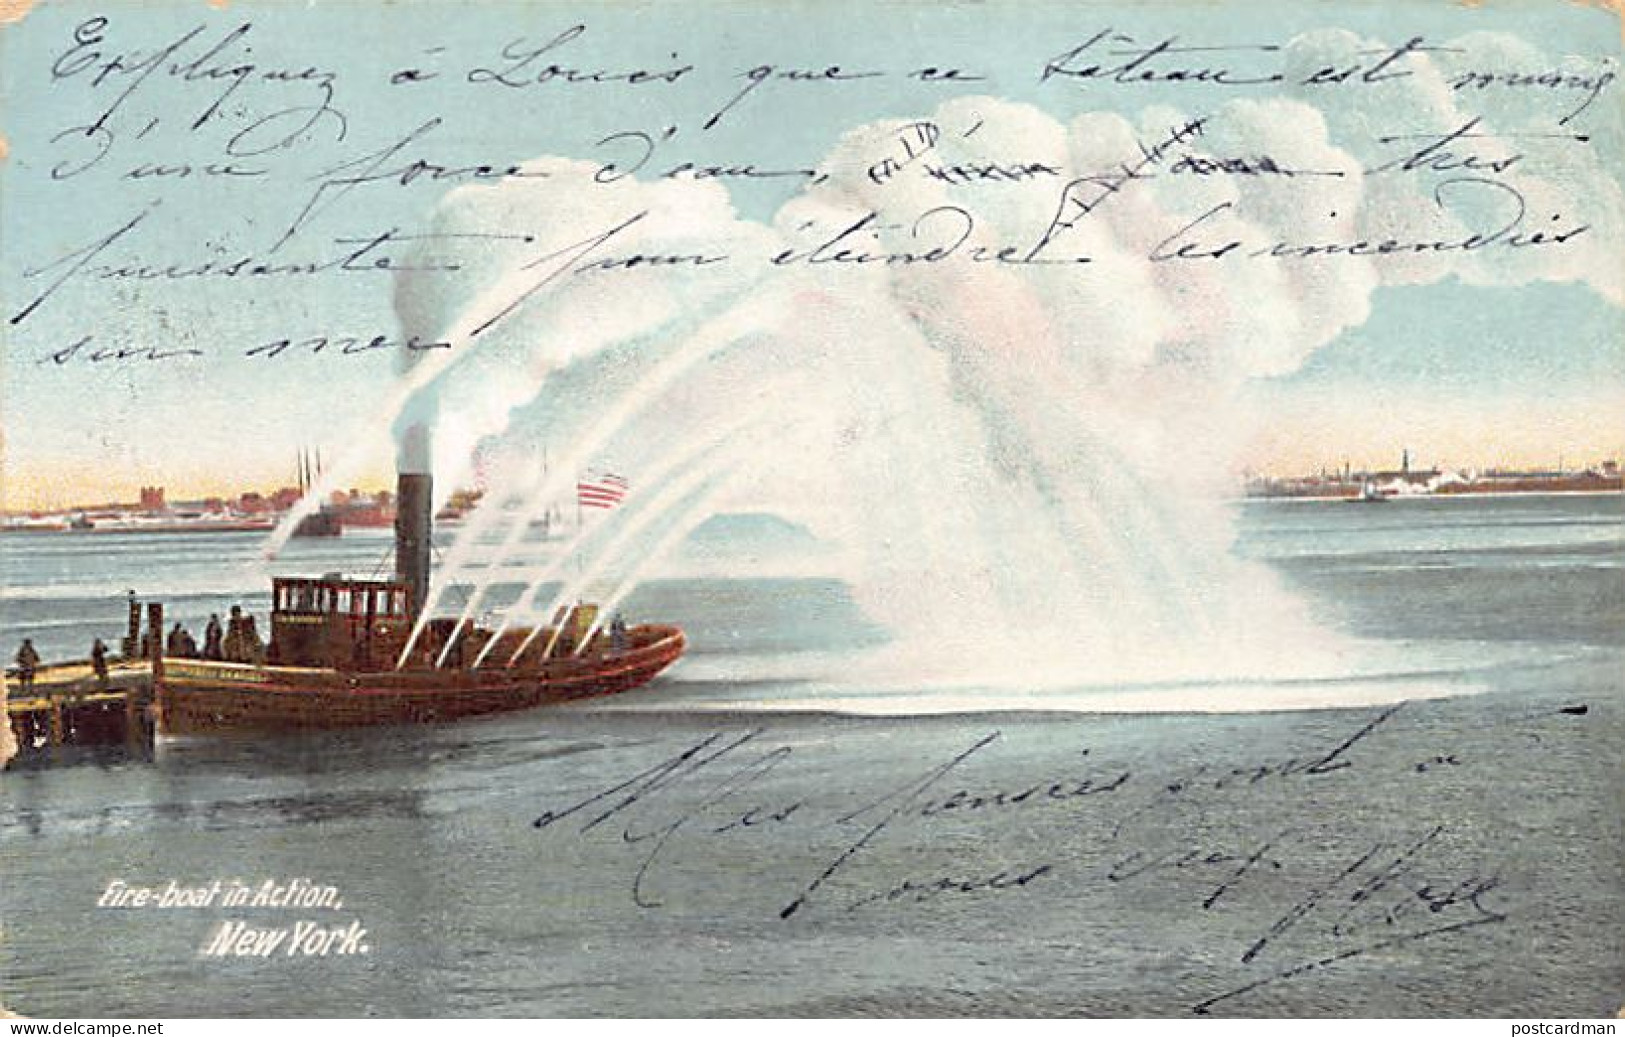 Usa - NEW YORK CITY - Fire Boat In Action - Publ. H. C. Leighton Co. 502 - Manhattan